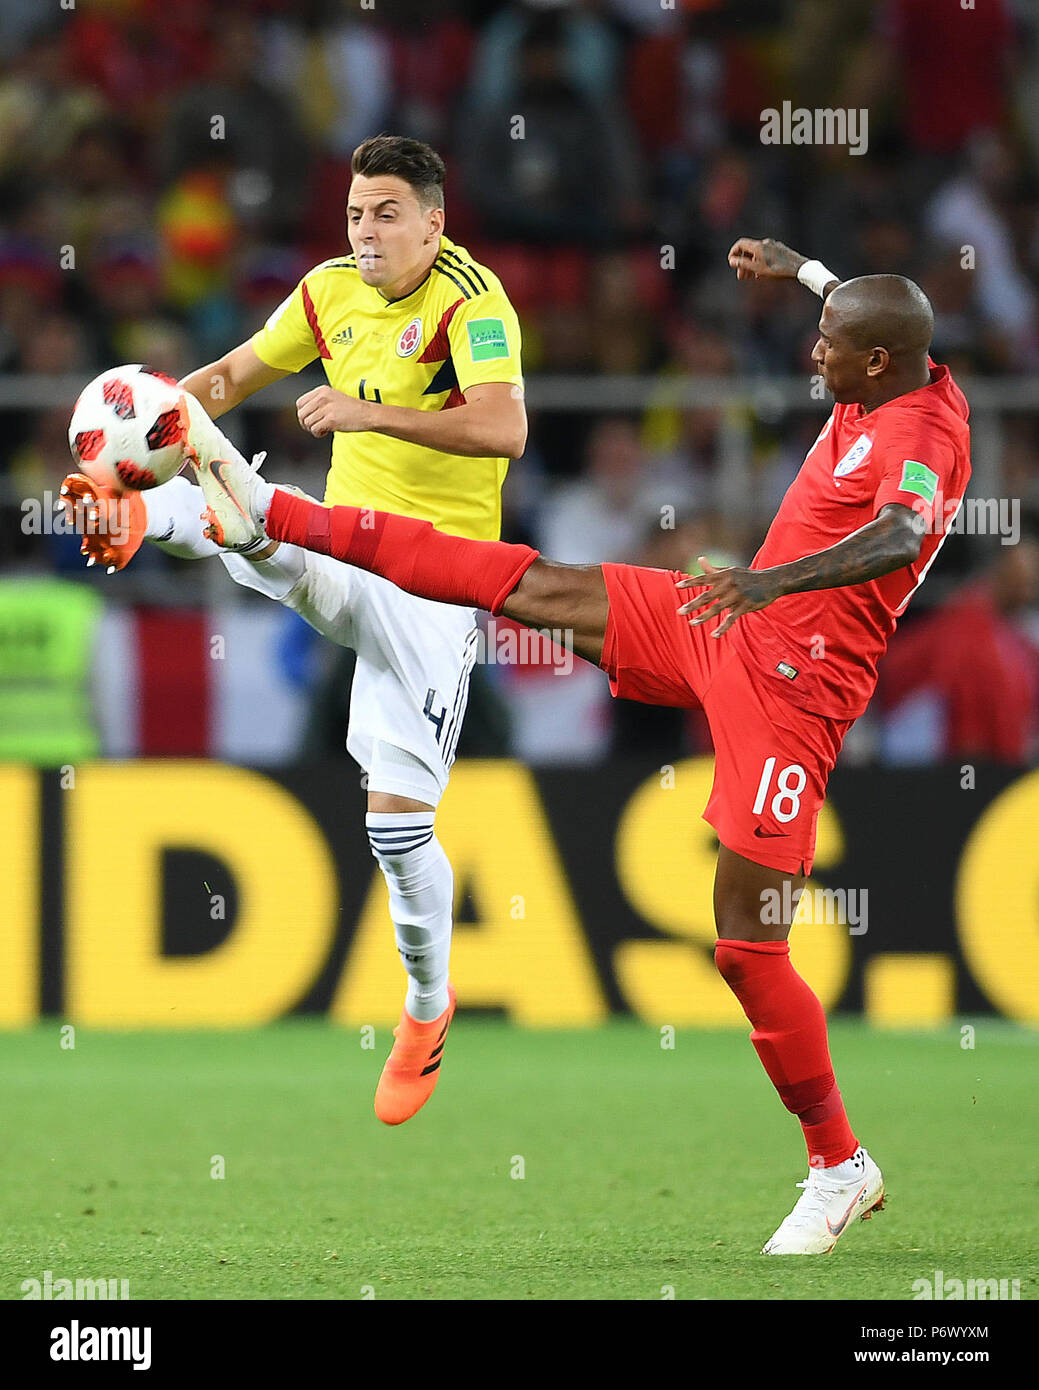 Moscow, Russia. 3rd July, 2018. Ashley Young (R) of England vies with Santiago Arias of Colombia during the 2018 FIFA World Cup round of 16 match between England and Colombia in Moscow, Russia, July 3, 2018. Credit: Du Yu/Xinhua/Alamy Live News Stock Photo